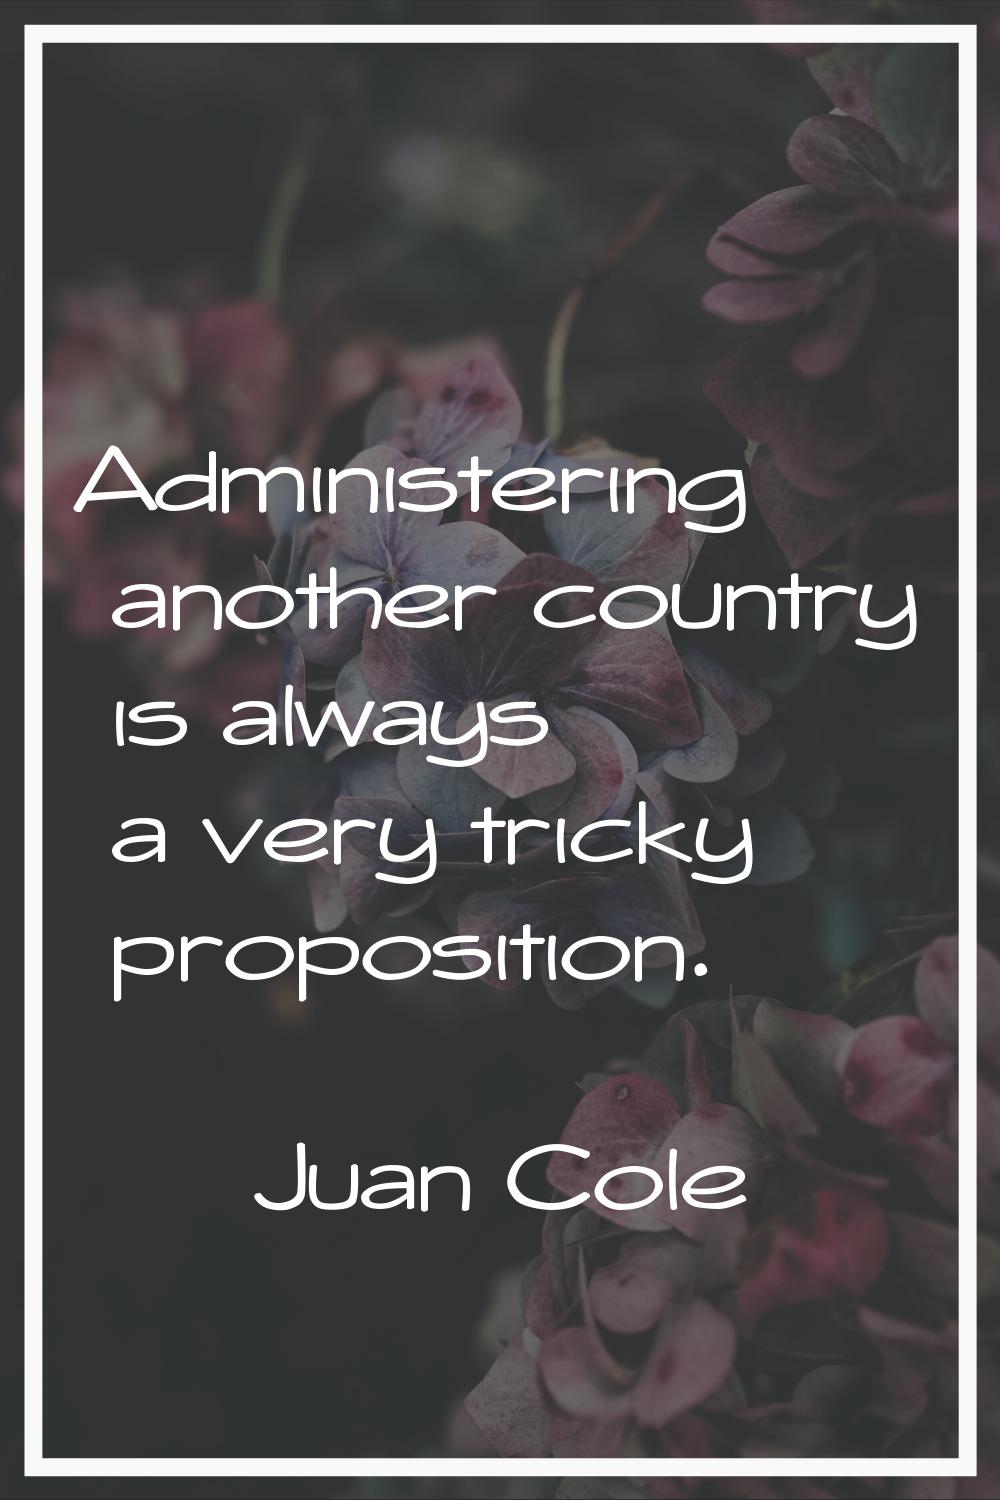 Administering another country is always a very tricky proposition.